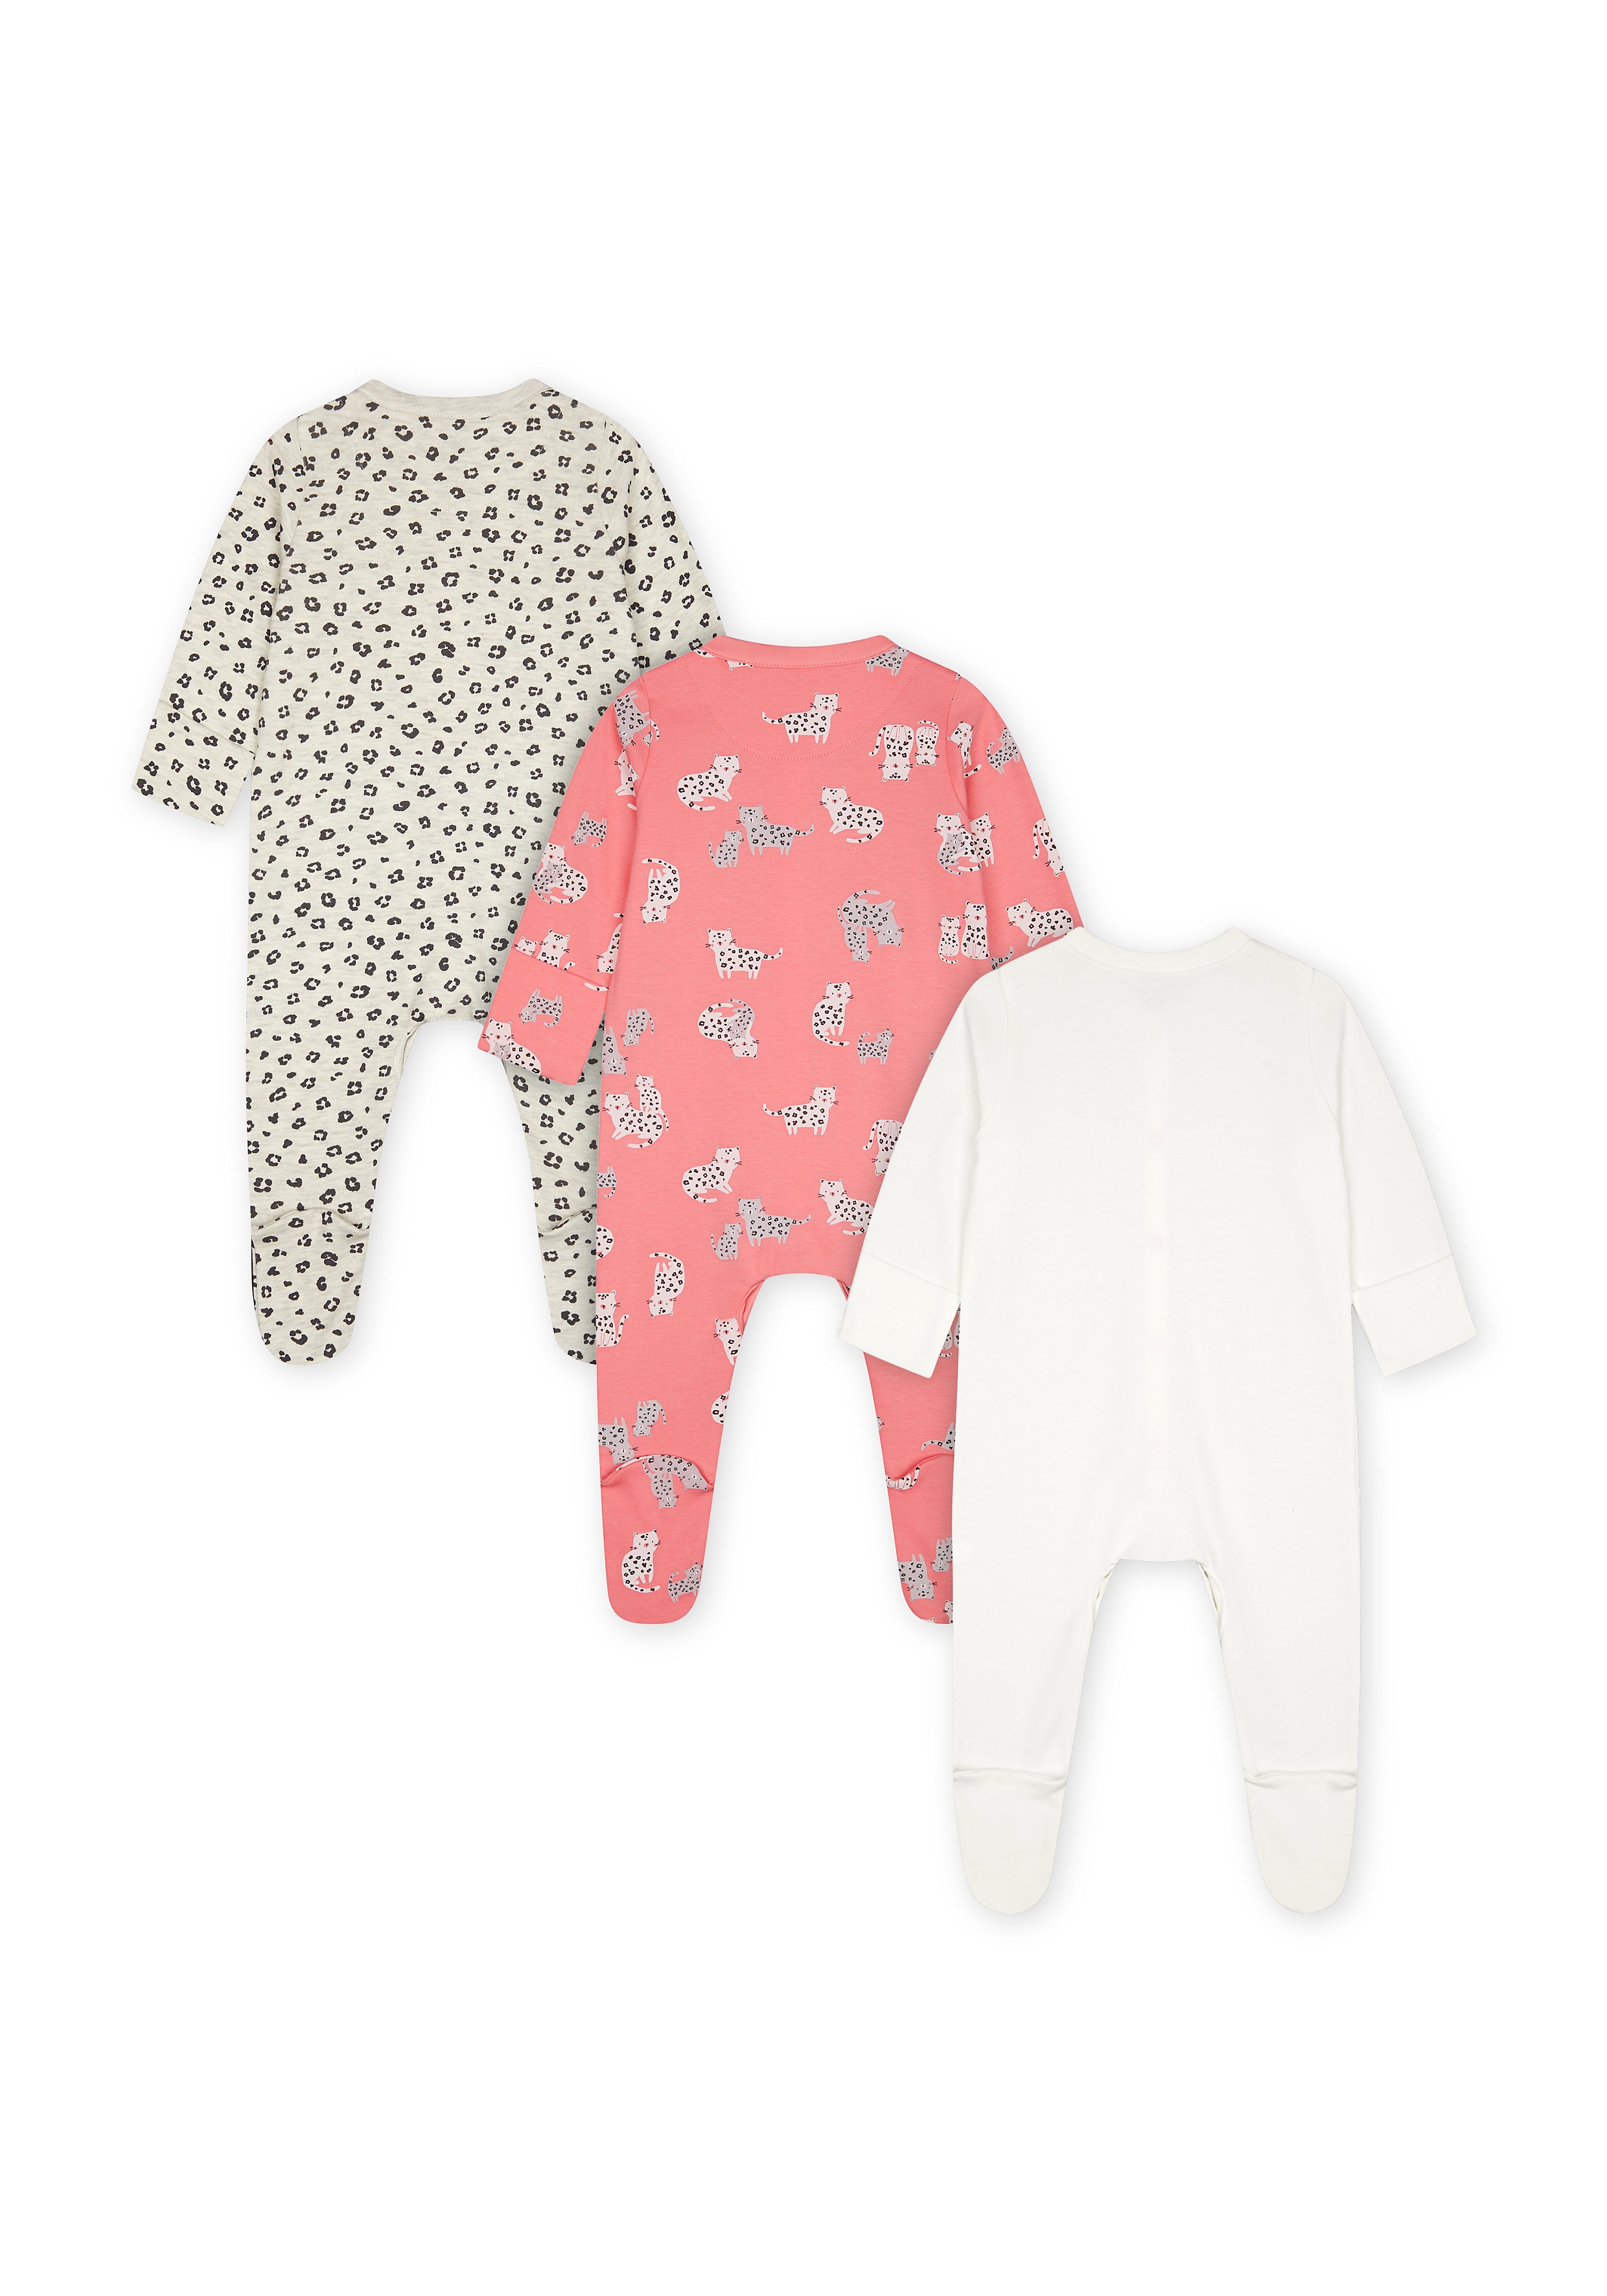 Mothercare | Girls Full Sleeves Sleepsuits  - Pack Of 3 - Pink 1